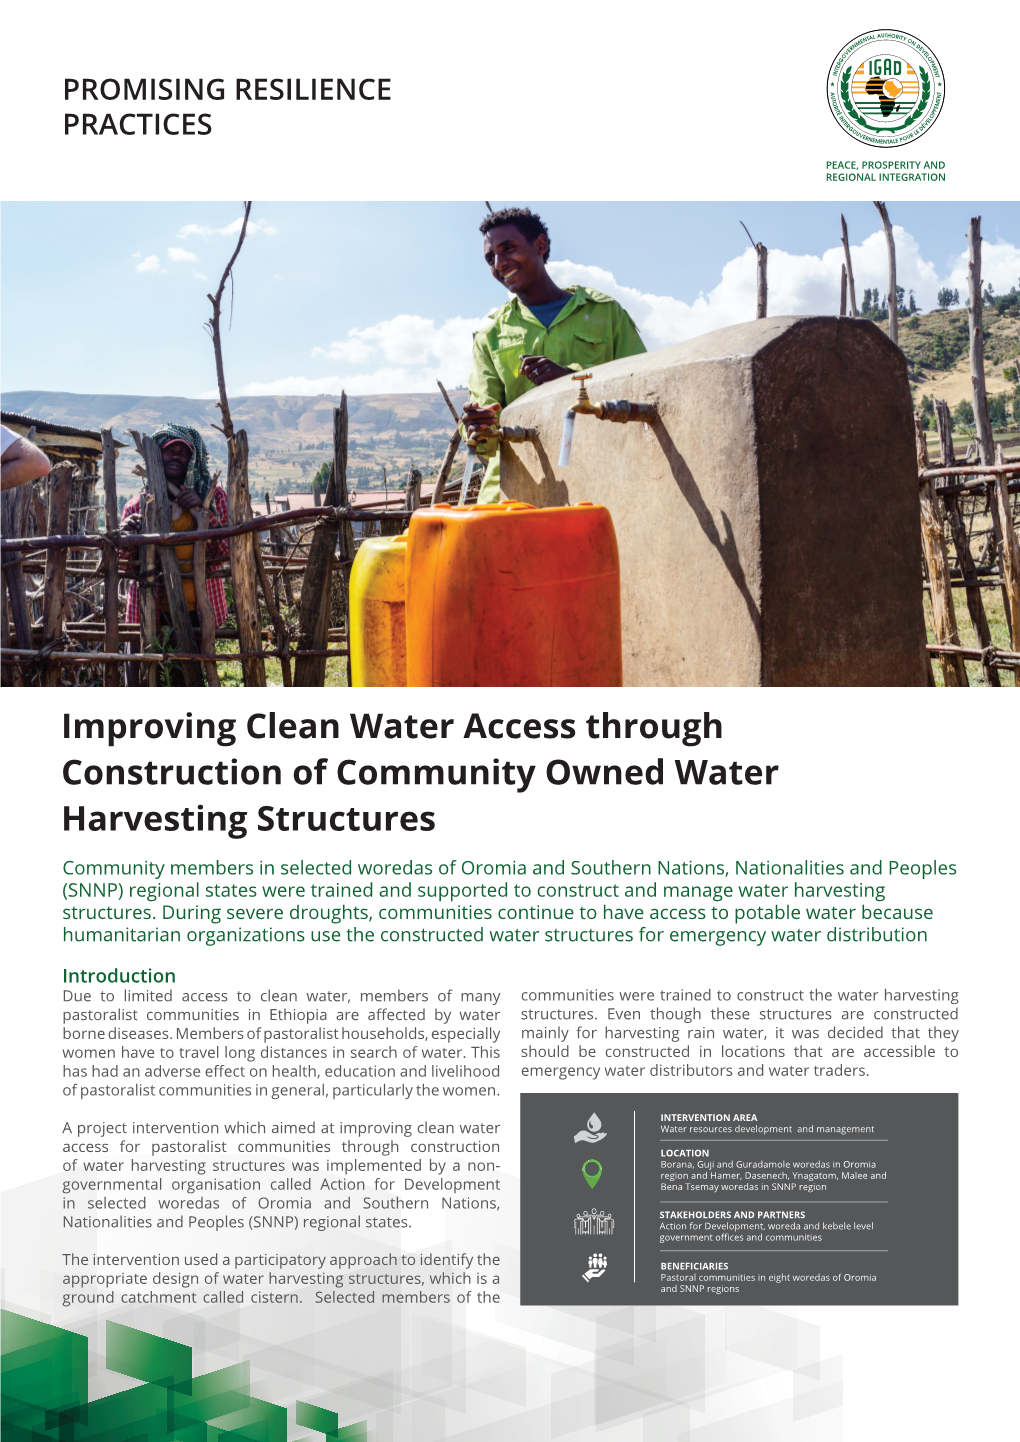 Improving Clean Water Access Through Construction of Community Owned Water Harvesting Structures